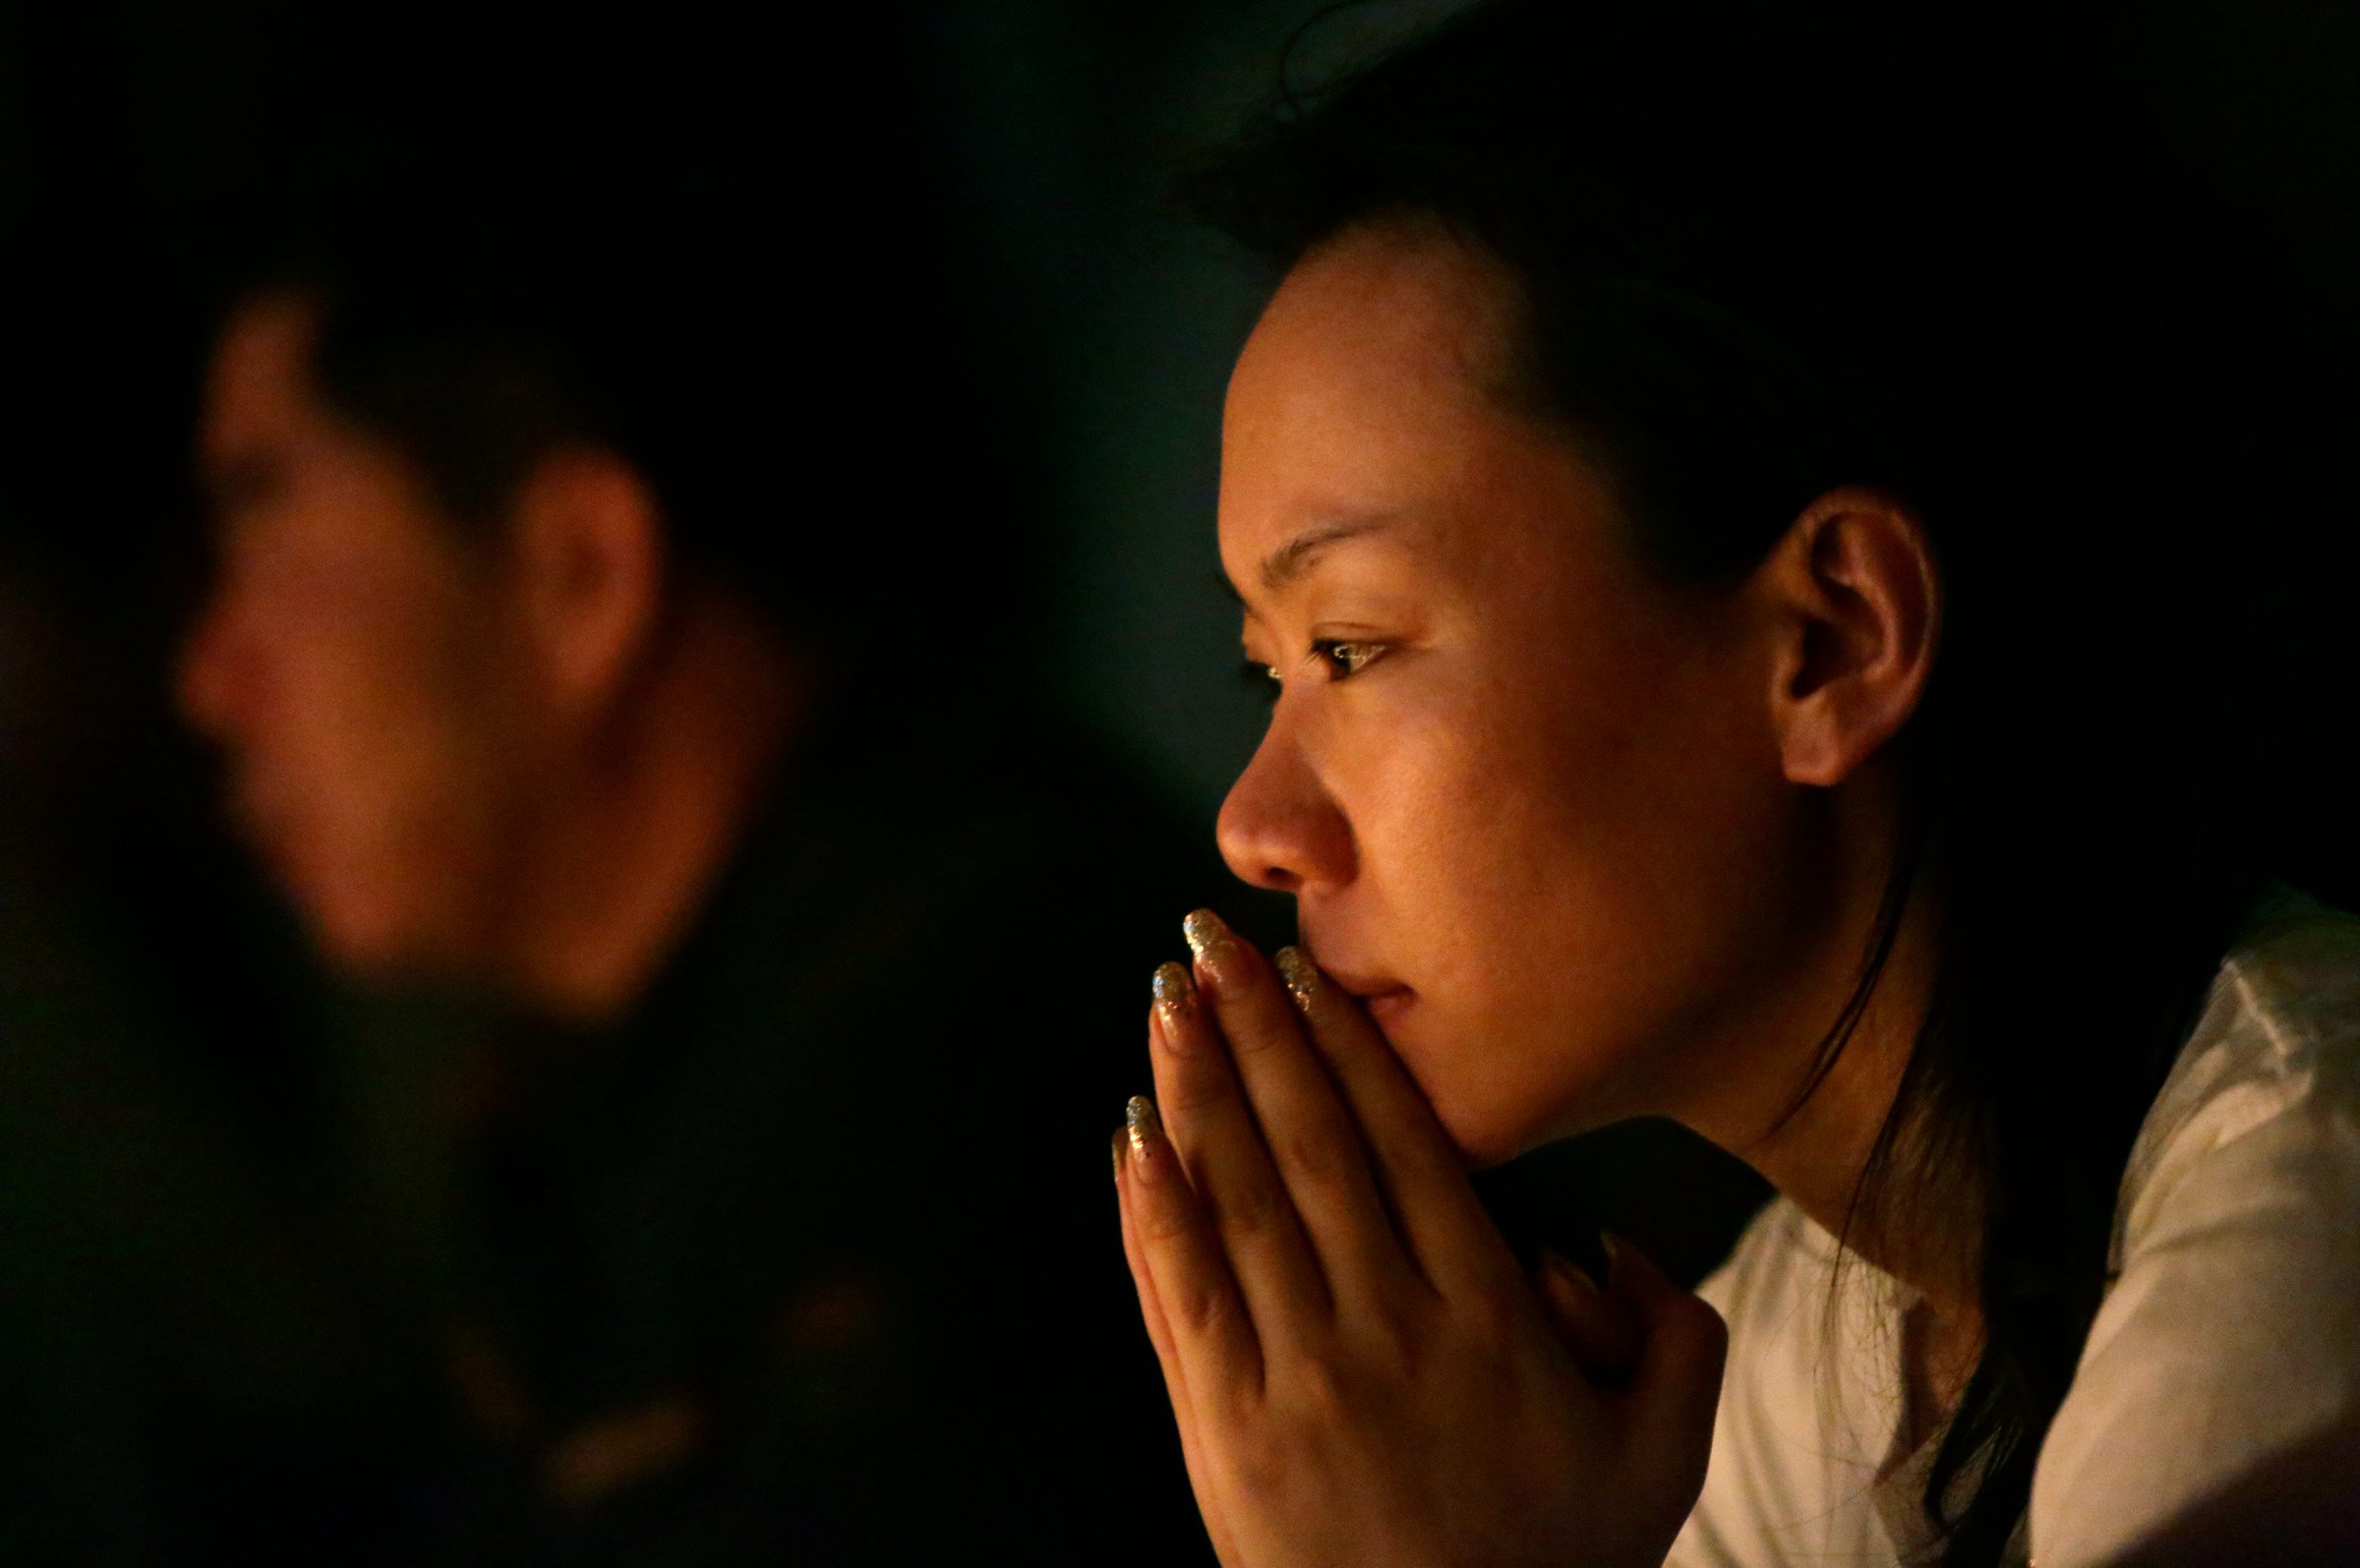 Family members pray during a candlelight vigil for passengers onboard the missing Malaysia Airlines Flight MH370 in the early morning, at Lido Hotel, in Beijing on April 8, 2014.